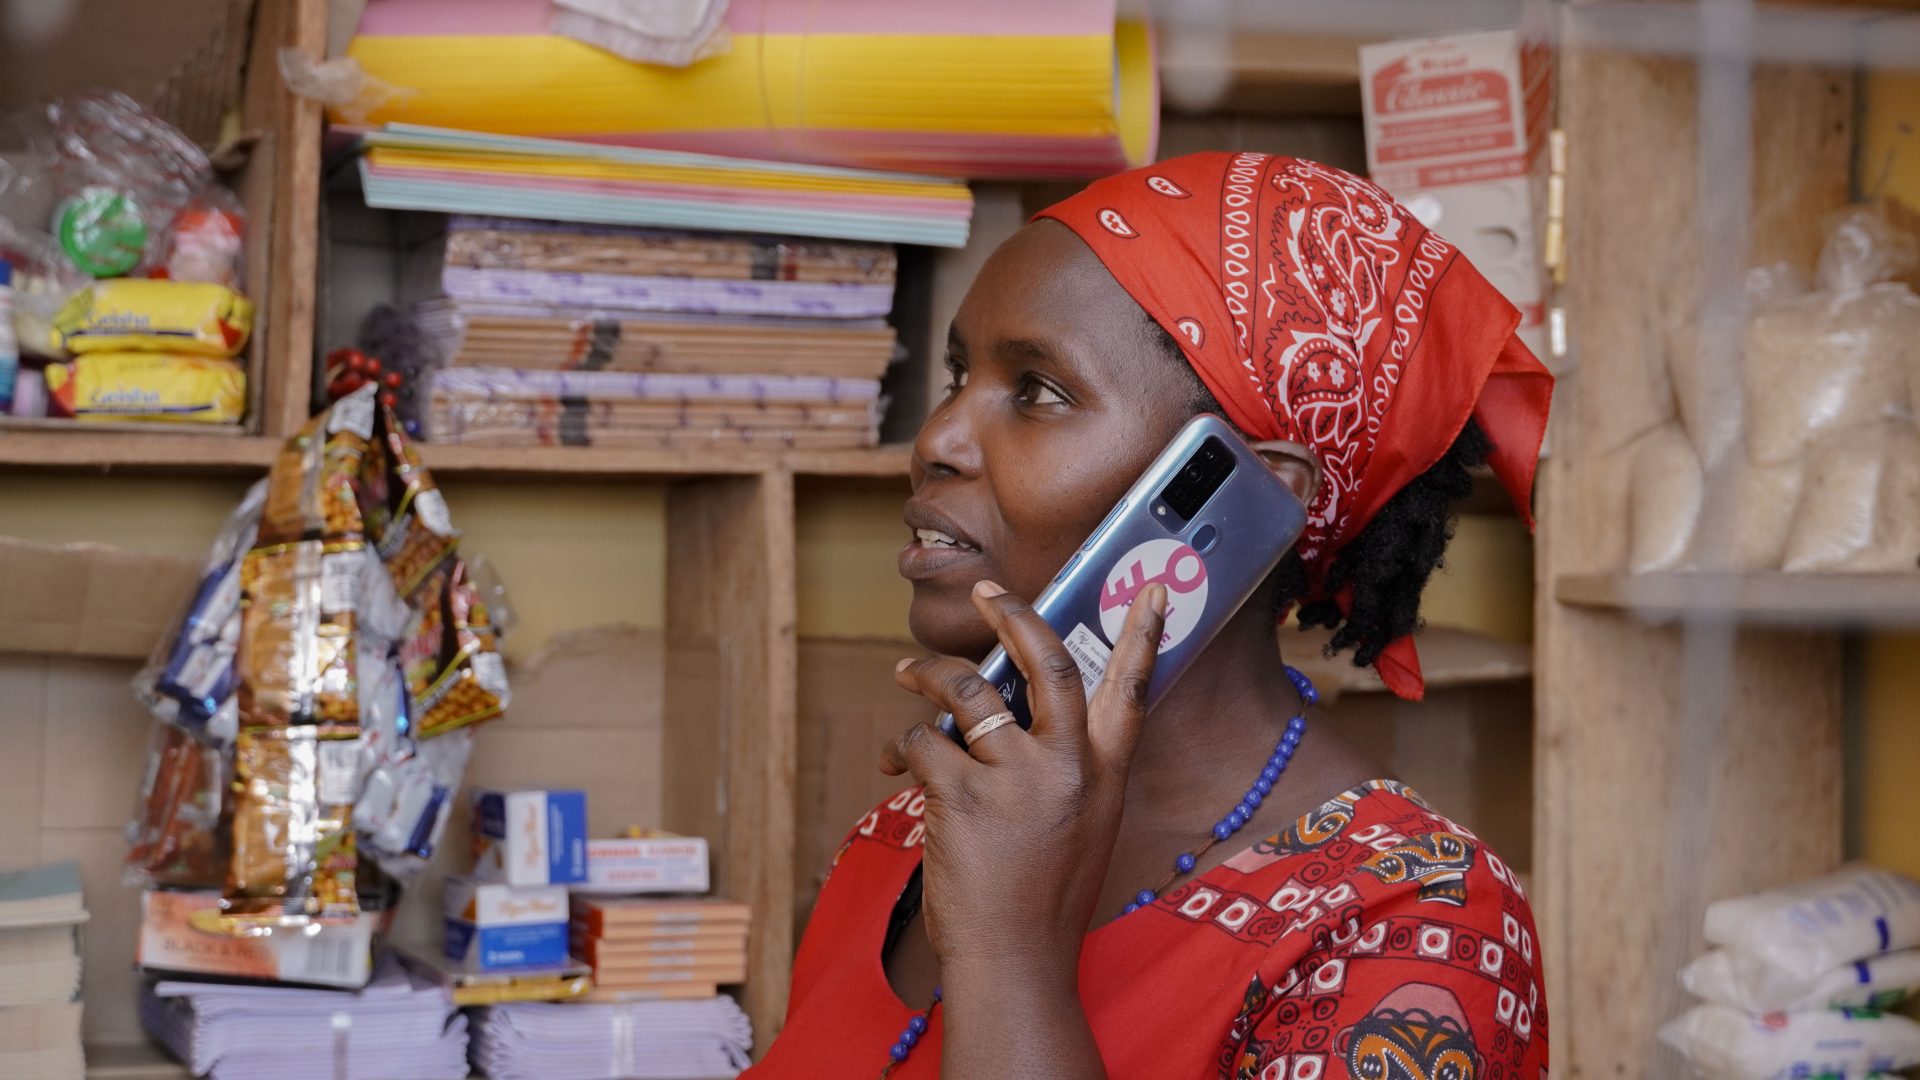 KEIPhone provides wireless access to thousands of women across Africa